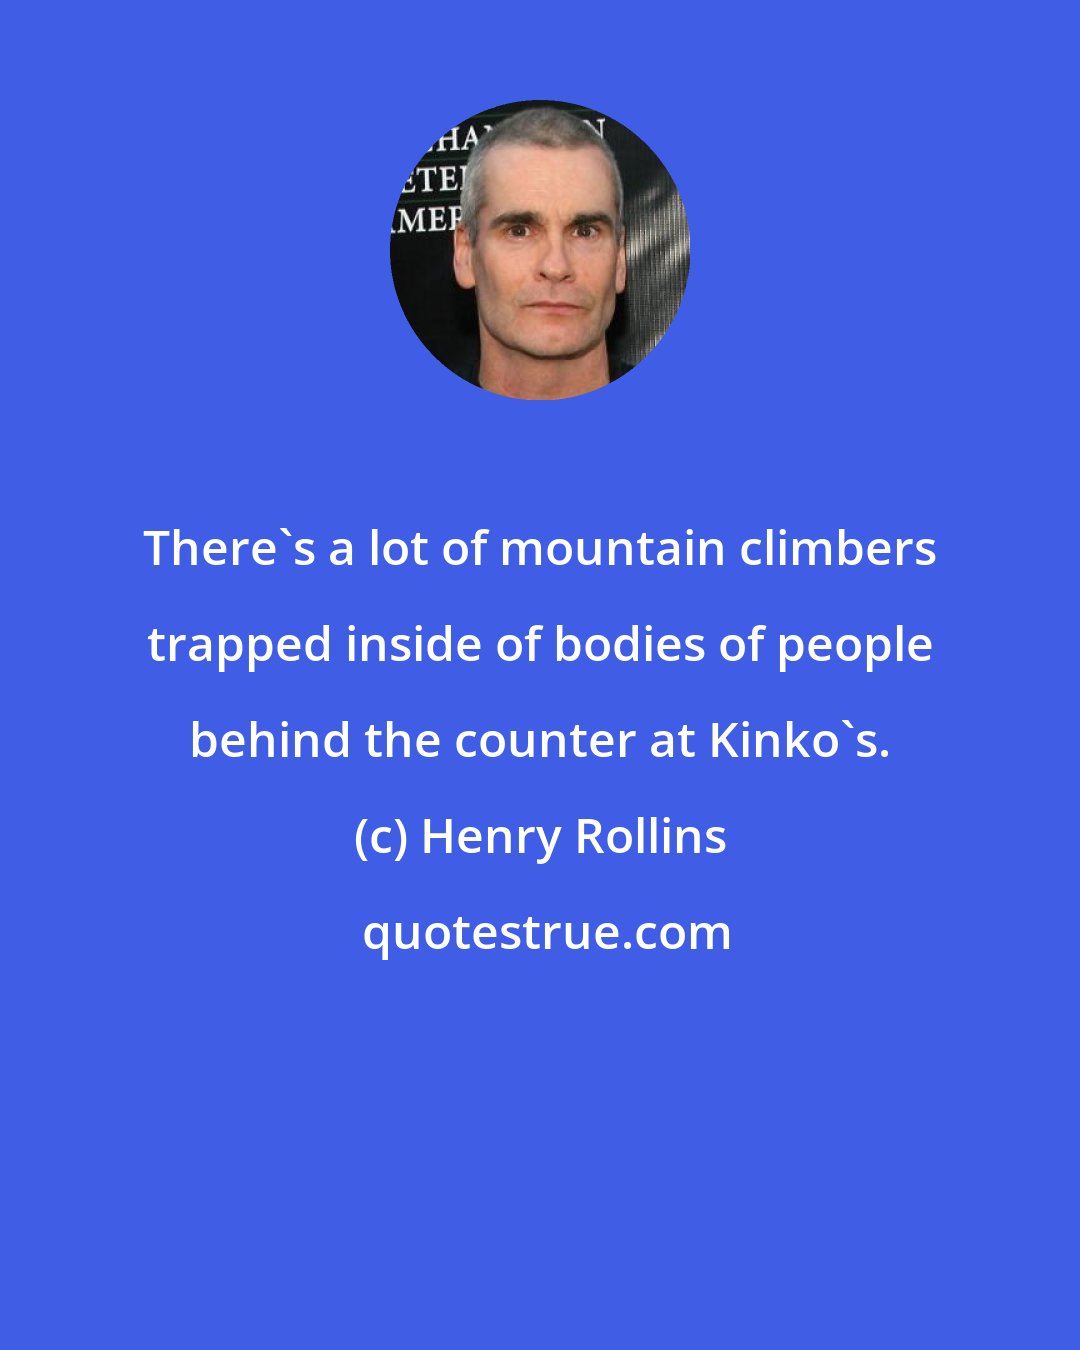 Henry Rollins: There's a lot of mountain climbers trapped inside of bodies of people behind the counter at Kinko's.